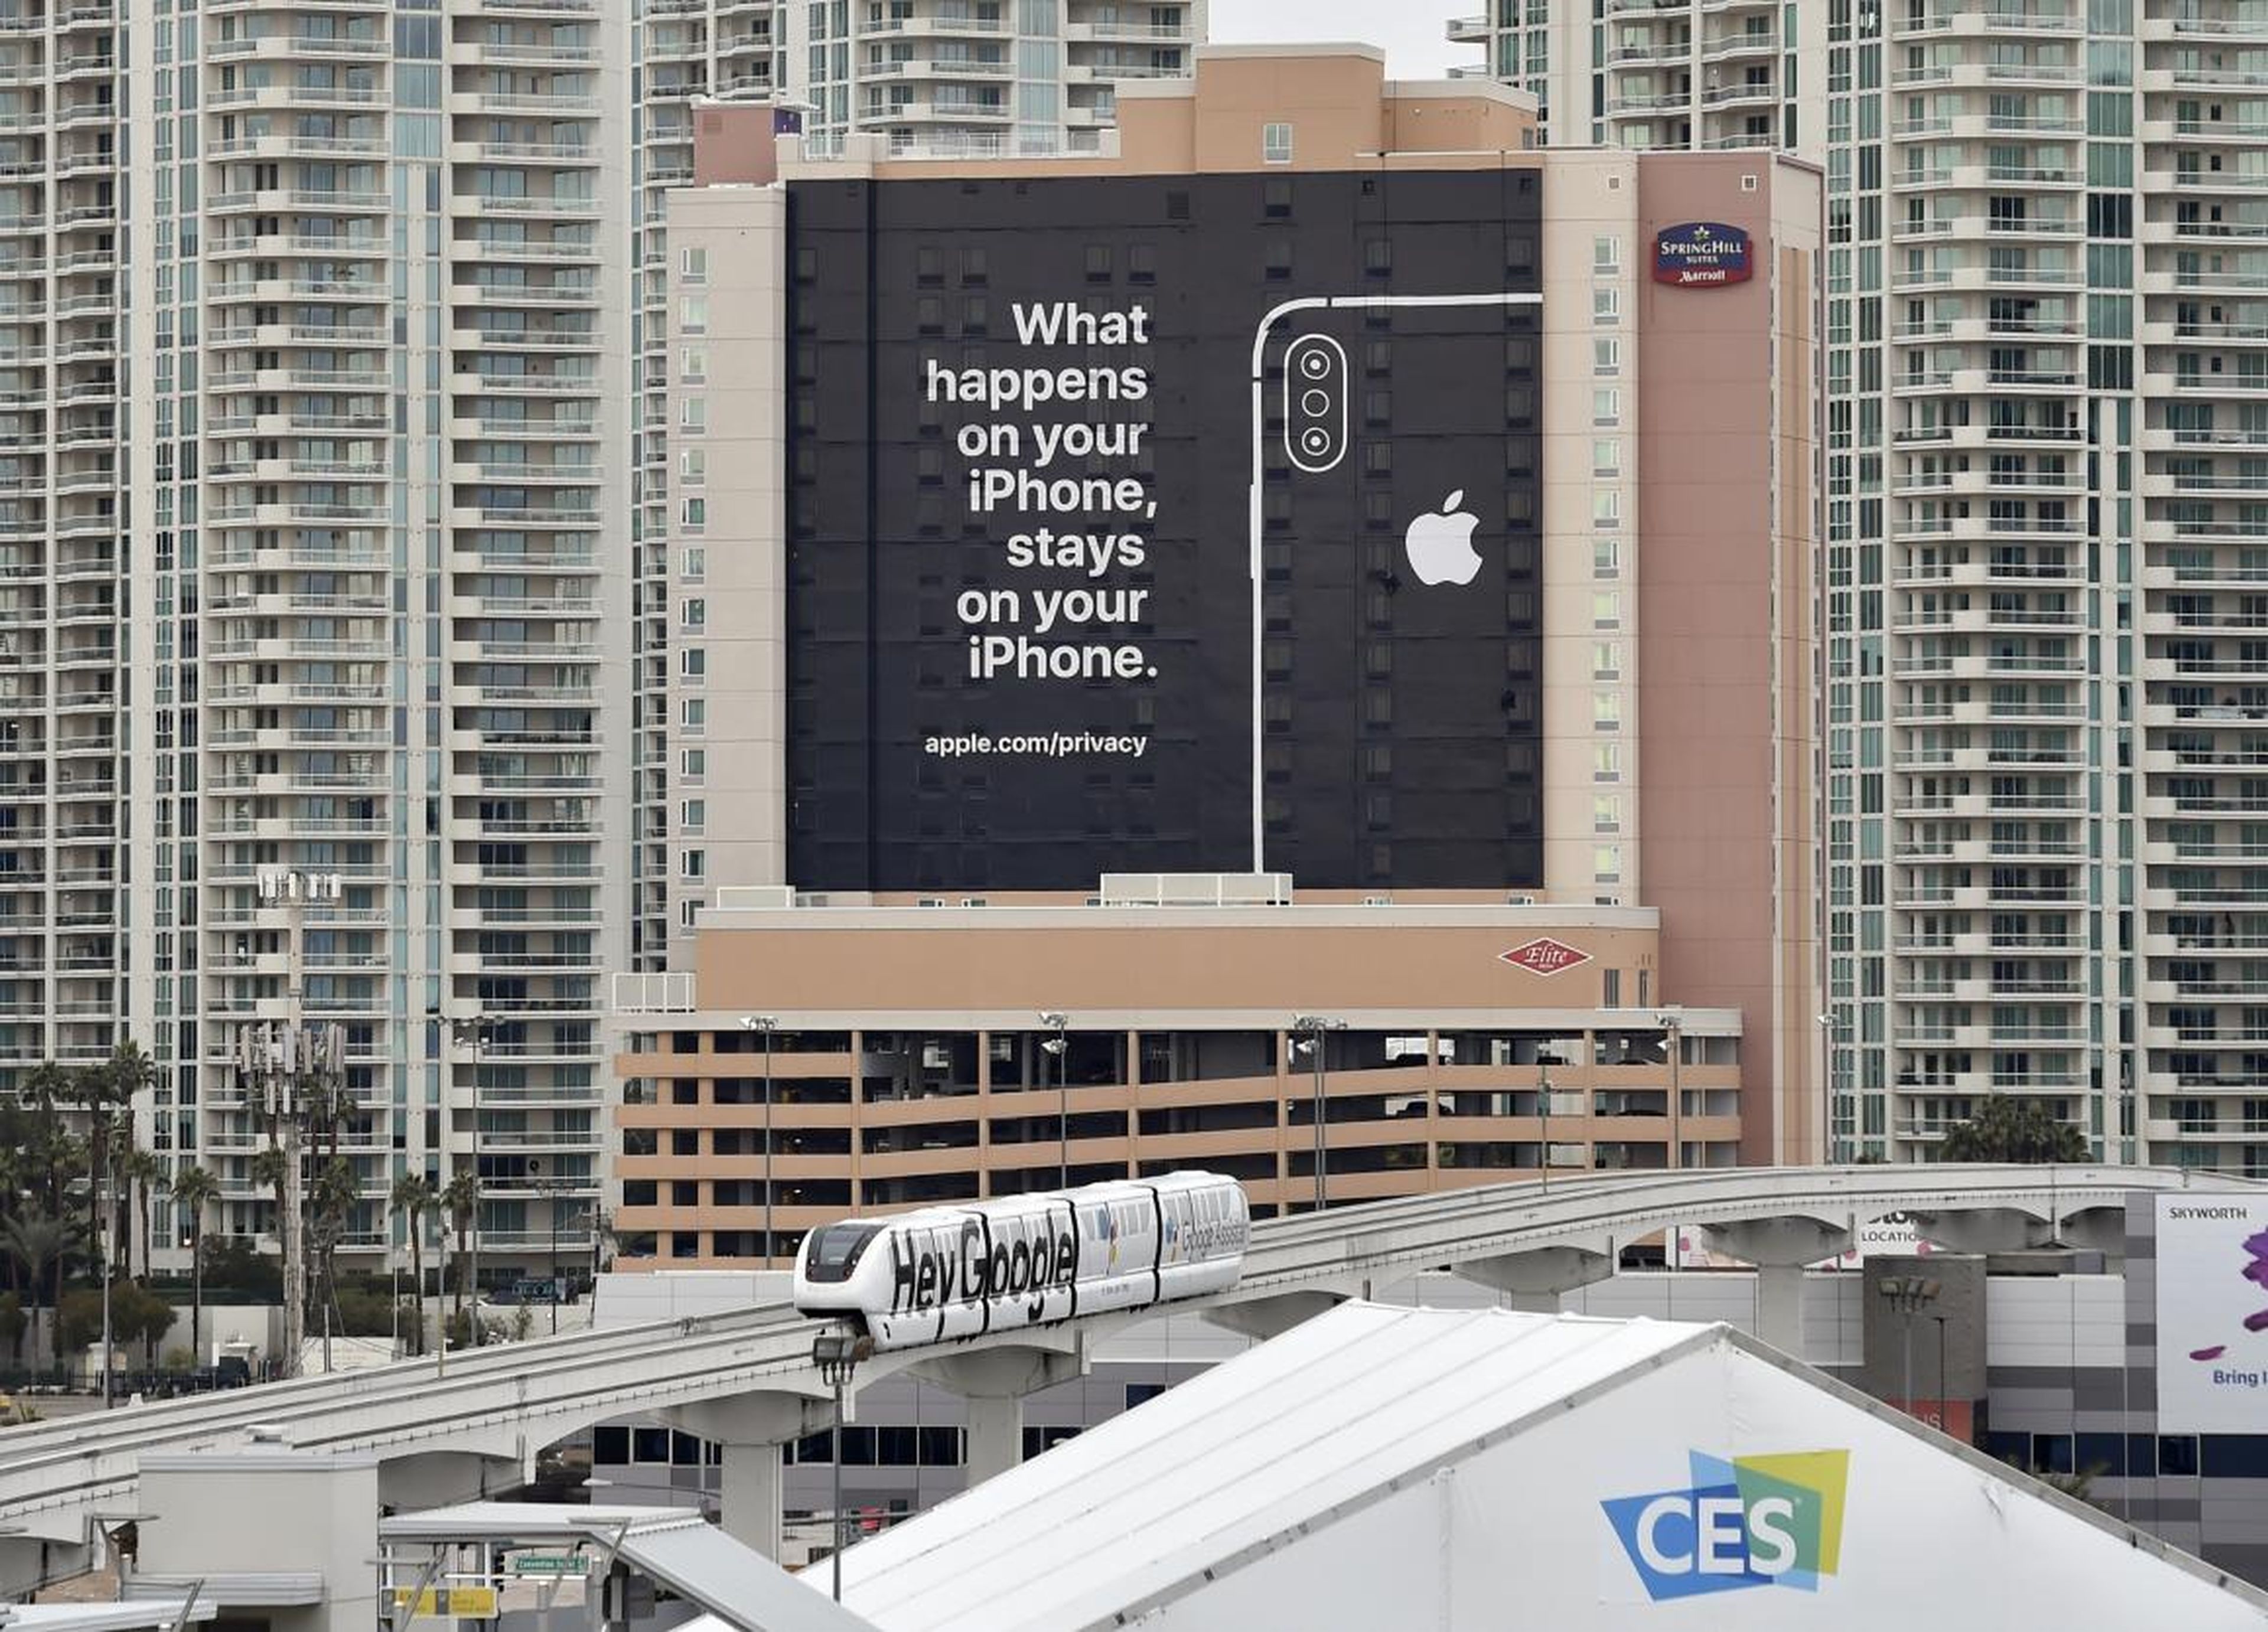 Apple doesn't officially attend CES, but made its presence known at this years event with a massive billboard highlighting the iPhone's privacy features. It was taken as a shot across the bow at Google, which sponsored the